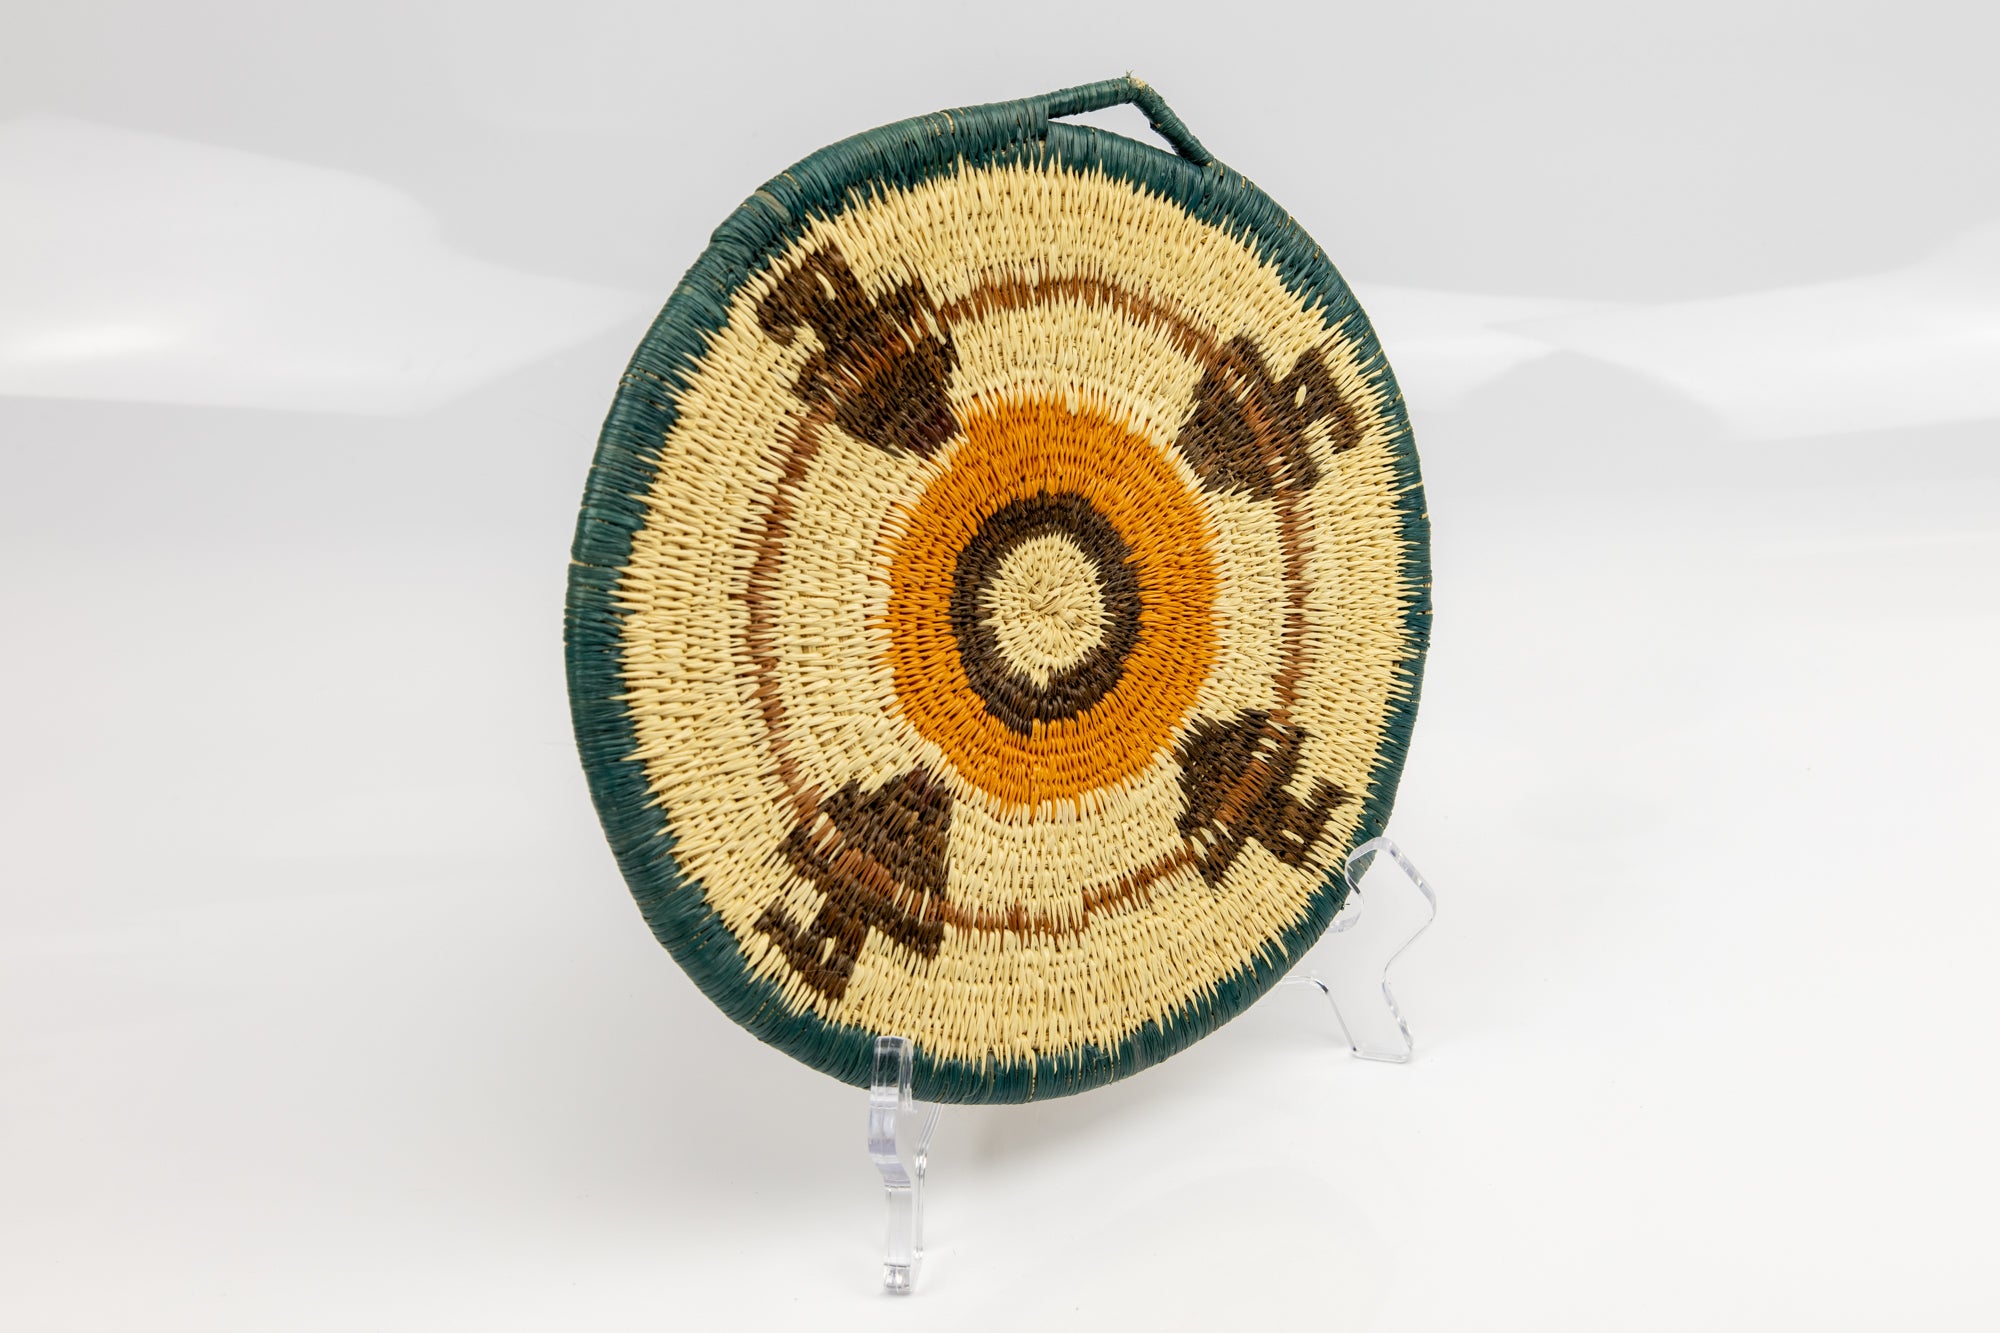 Hand woven plate basket from Panama. blue, gold, brown and white colors. Wall decoration. Indigenous artists Panama.